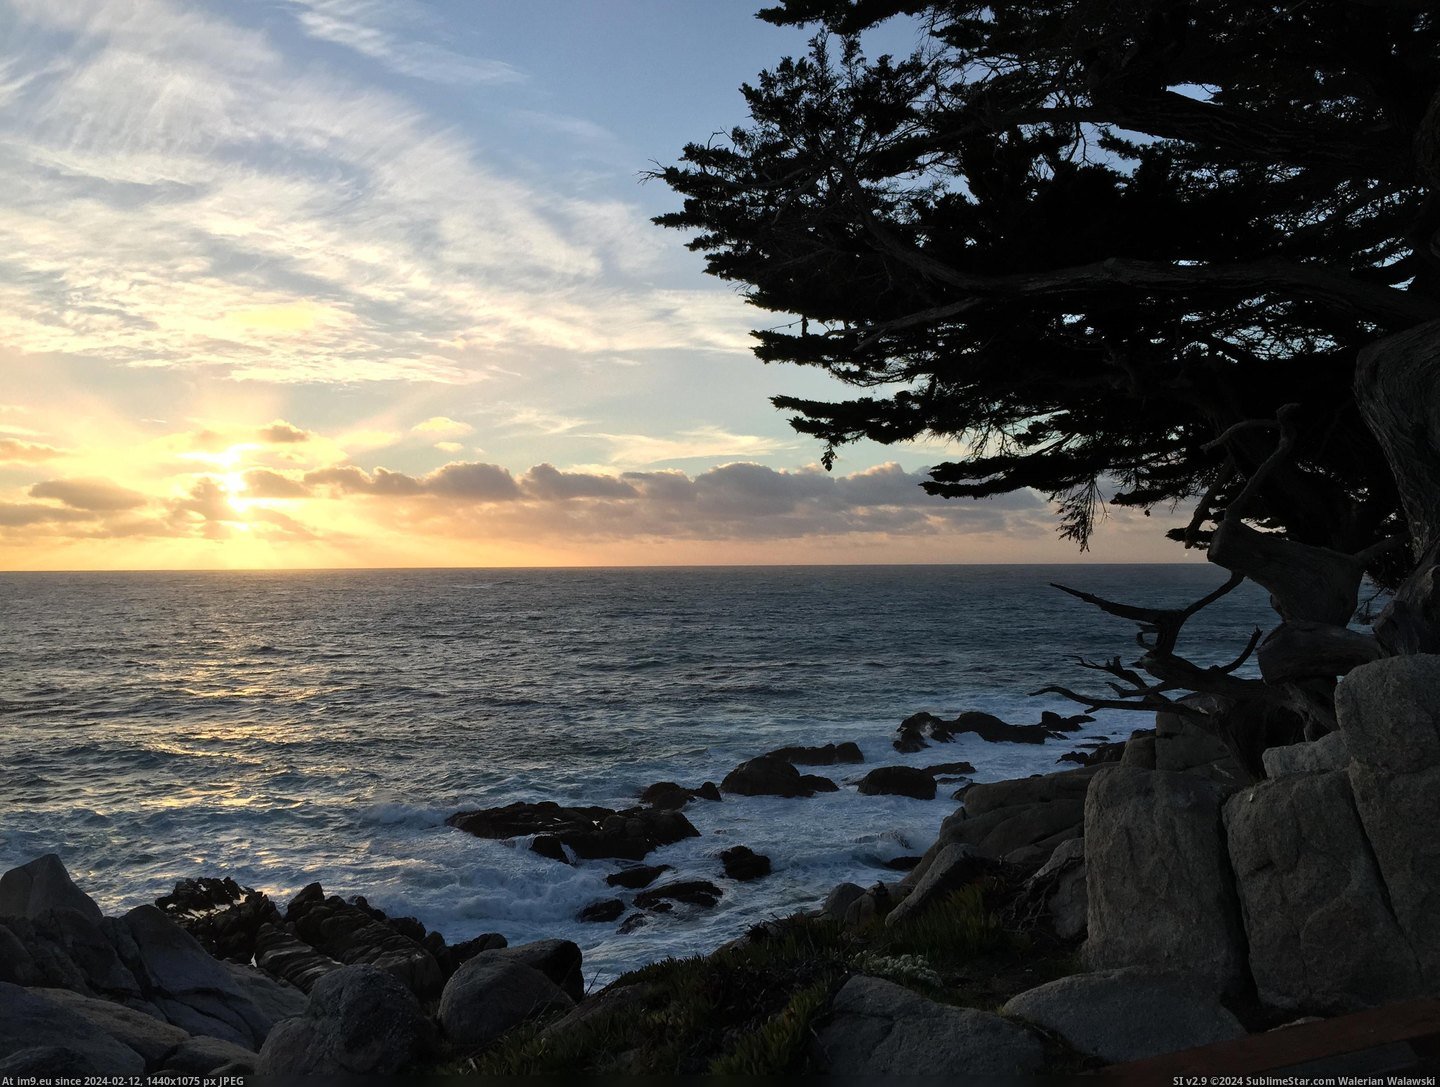 #Sunset #3264x2448 #Cypress #Drive #Mile [Earthporn] Cypress Sunset - 17 Mile Drive, CA 2015 [3264x2448] Pic. (Изображение из альбом My r/EARTHPORN favs))